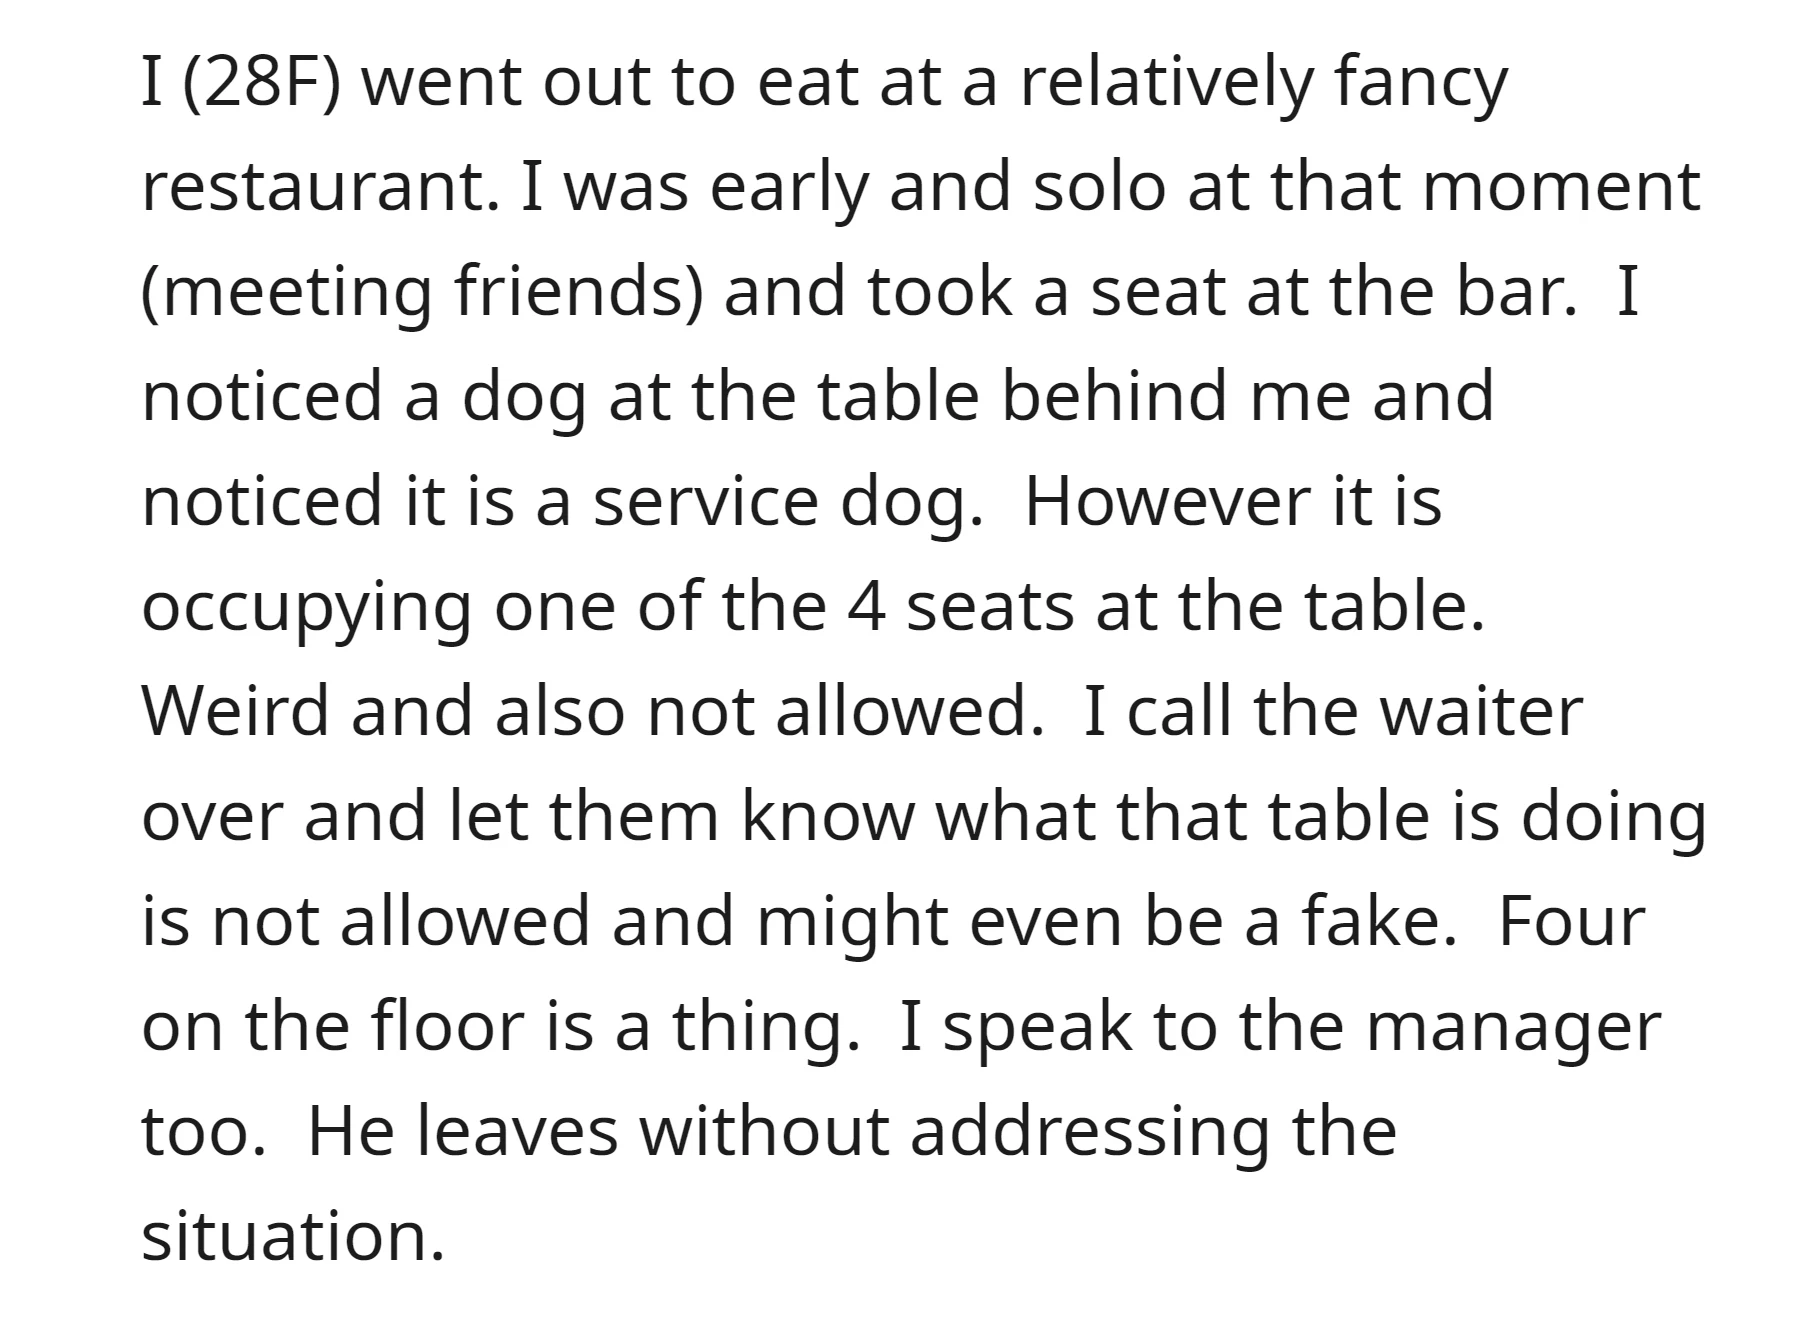 a dog occupying one of the 4 seats at the table